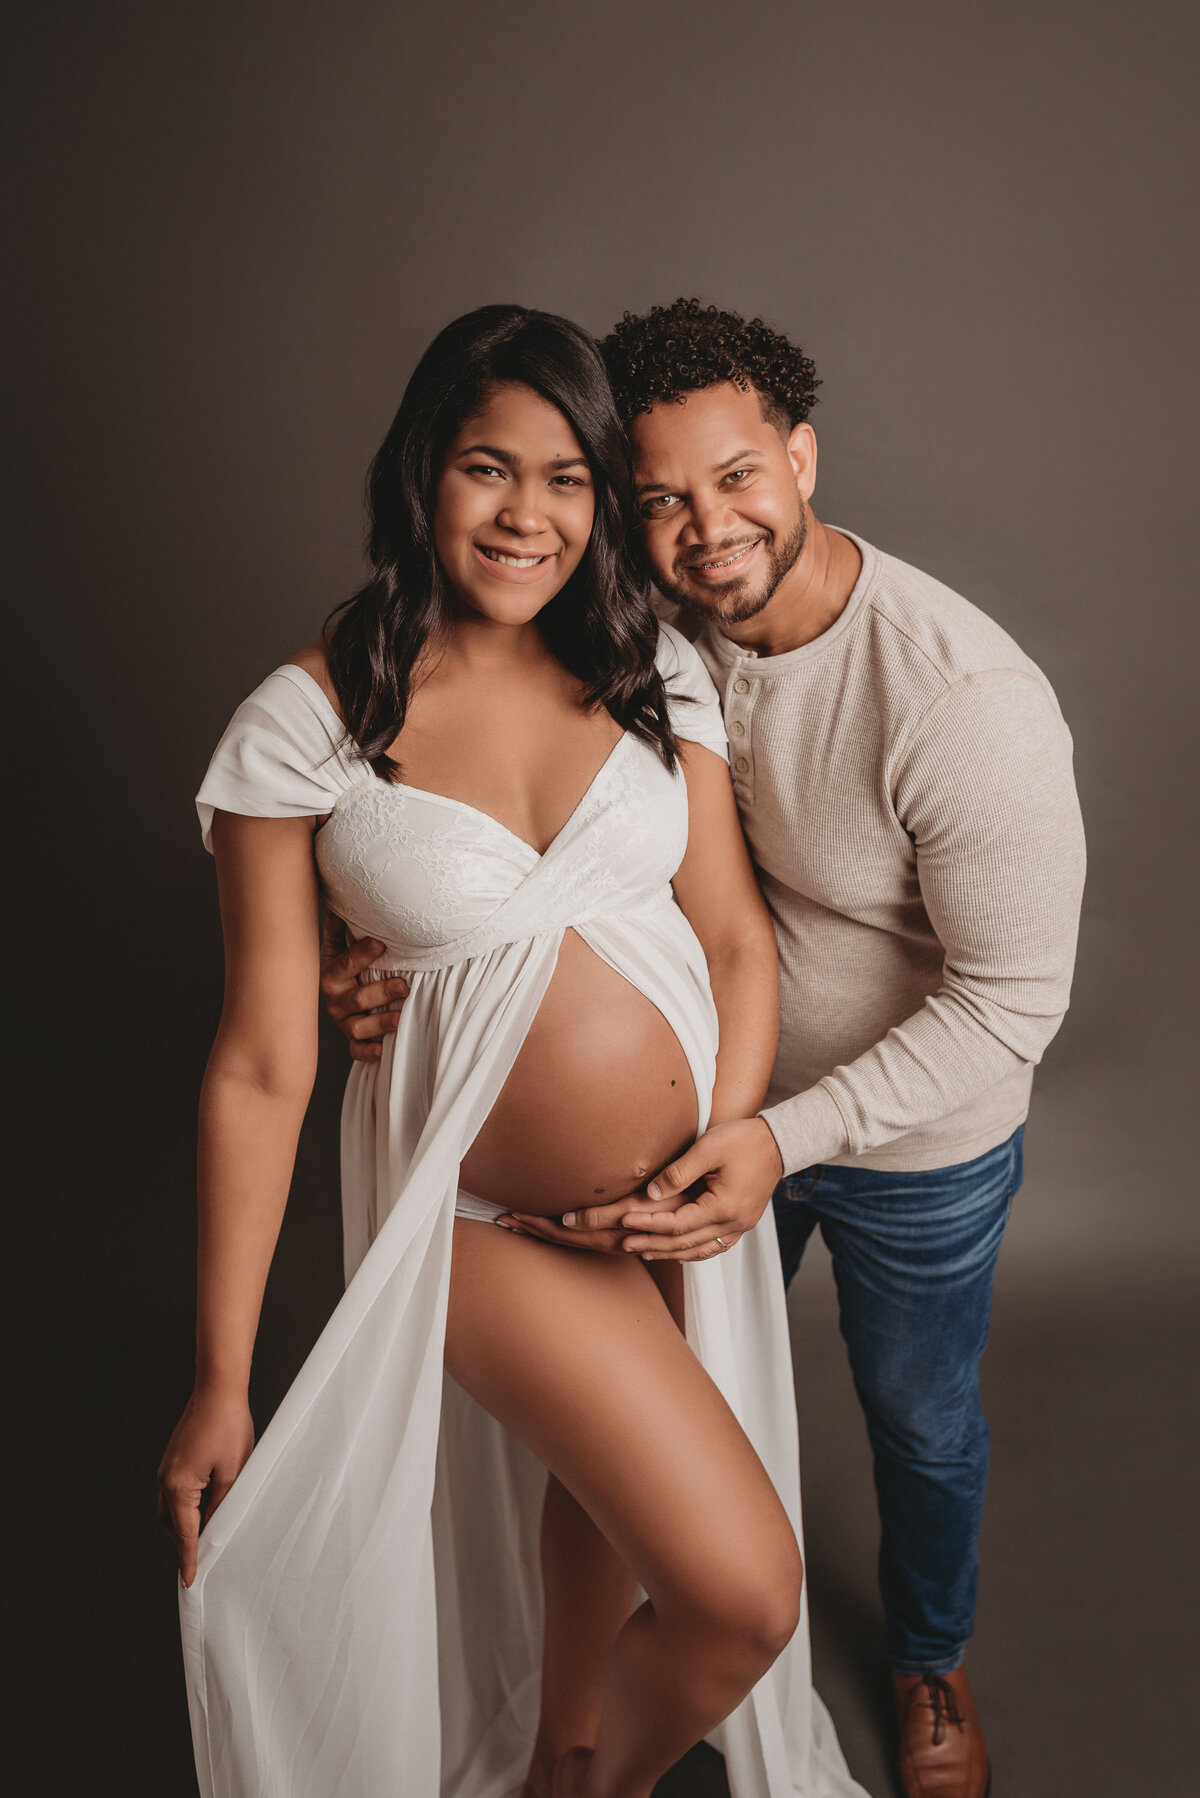 36 weeks pregnant couple woman showing bare belly and she and husband are holding her tummy. Woman is wearing white sheer maternity dress and man is wearing a cream long sleeve shirt with jeans and brown shoes.